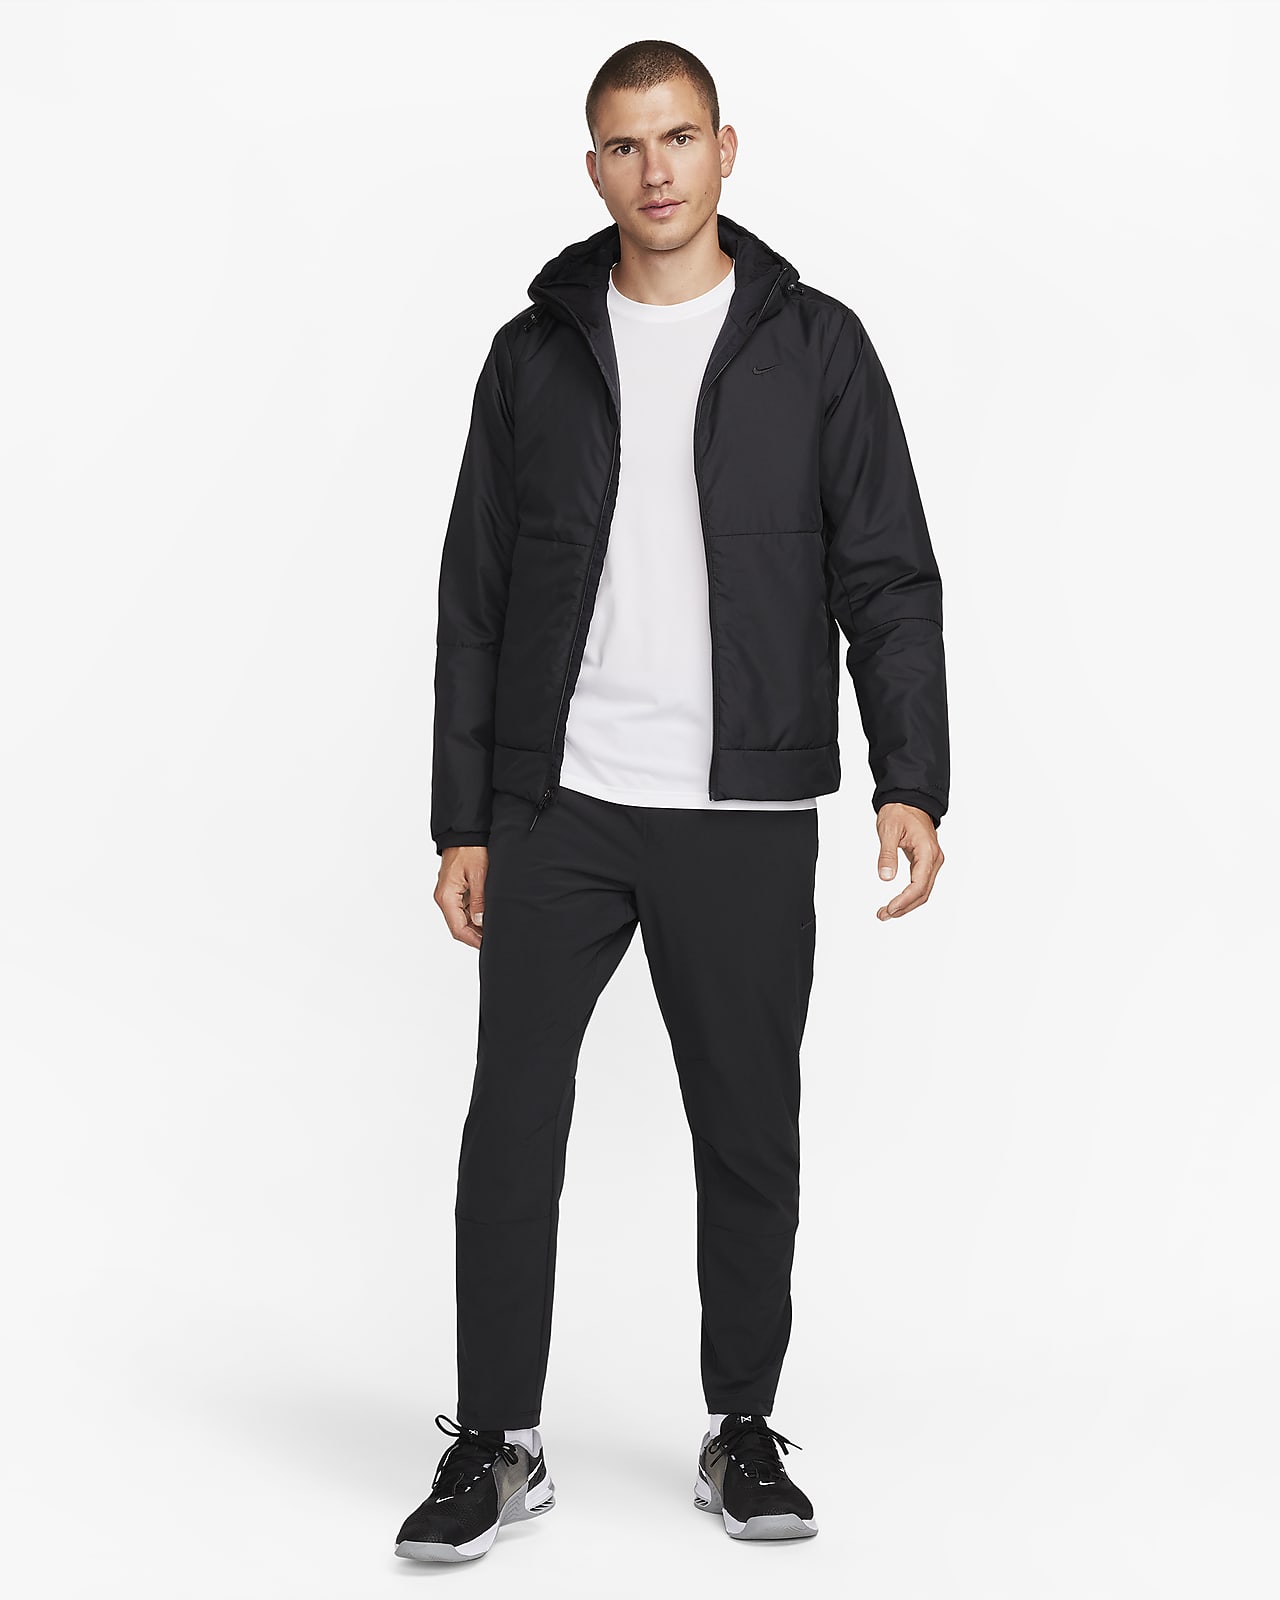 Veste Therma-FIT Nike Unlimited pour homme